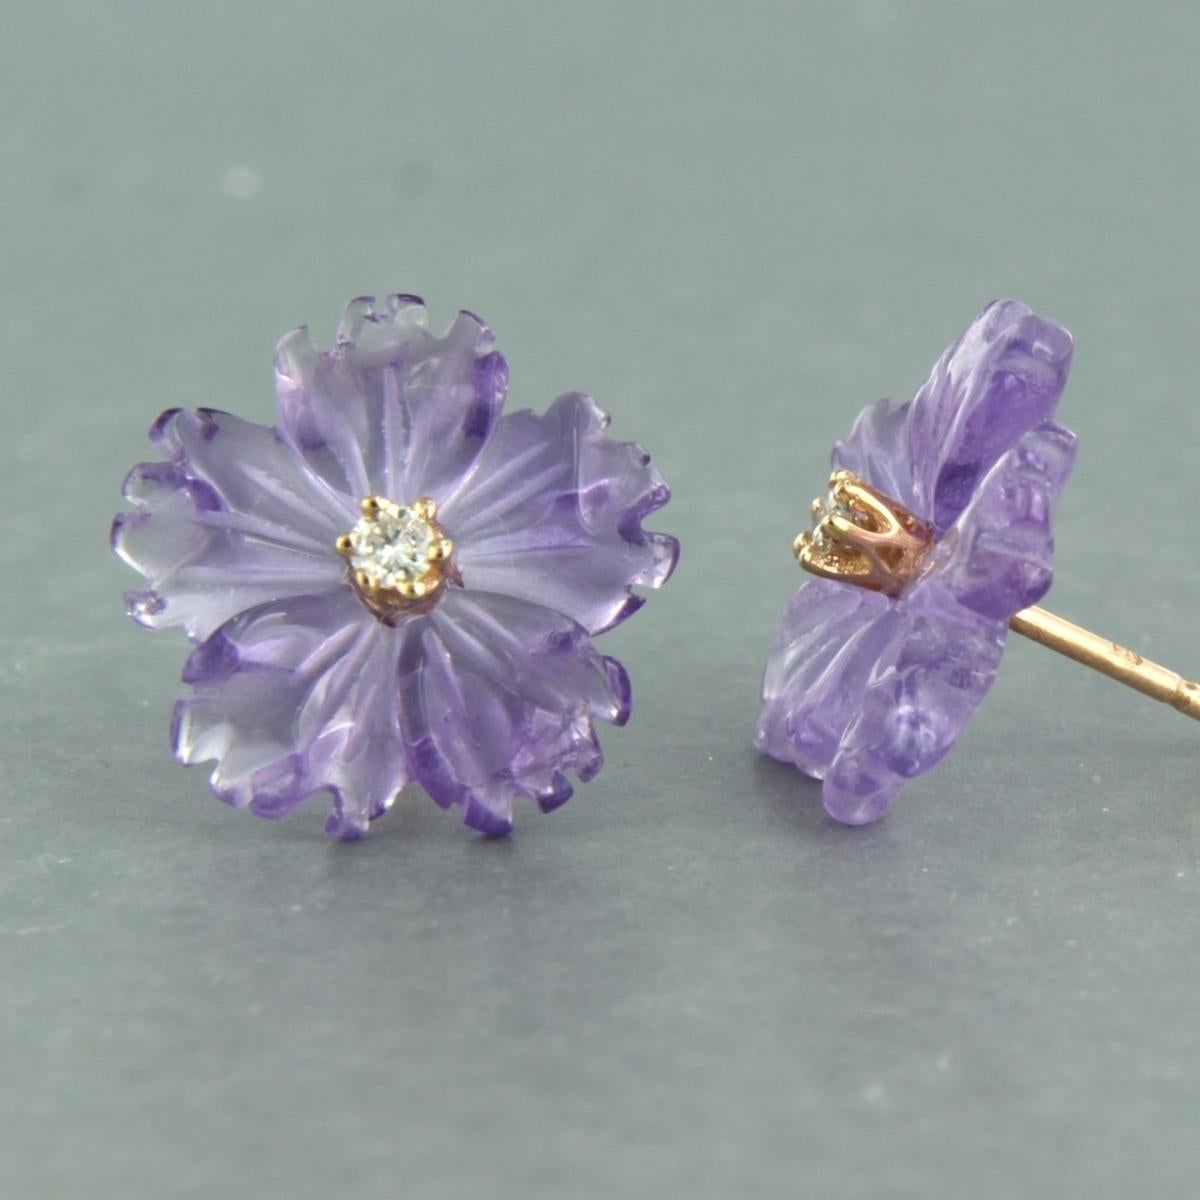 18k pink gold stud earrings with amethyst and brilliant cut diamond 0.08 ct - G/H - VS/SI

detailed description

ear studs have a diameter of 1.4 cm

Total weight 2.3 grams

set with

- 2 x 1.4 cm flower shape cut amethysts

color purple
clarity: